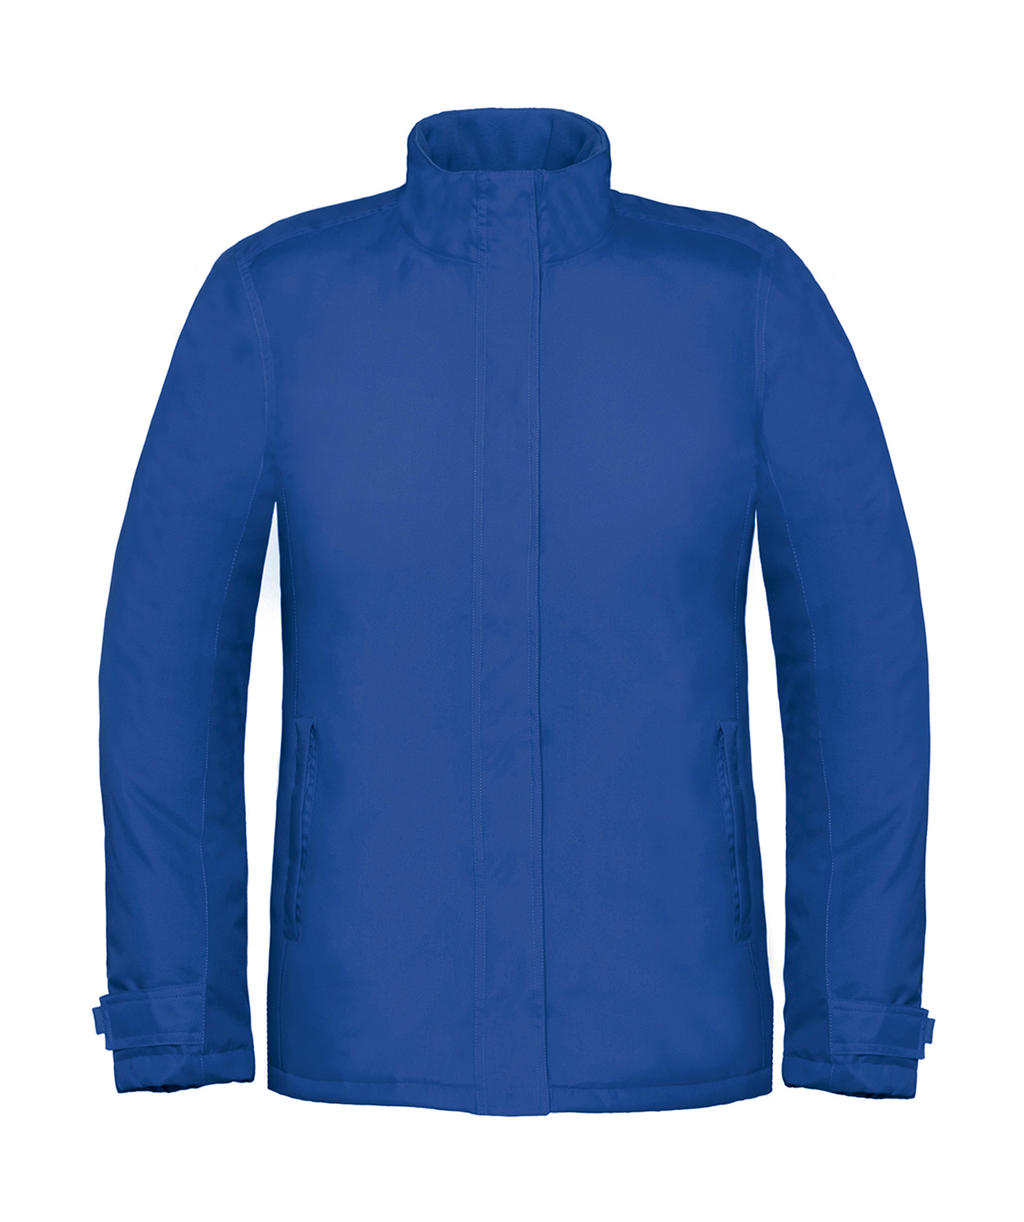  Real+/women Heavy Weight Jacket in Farbe Royal